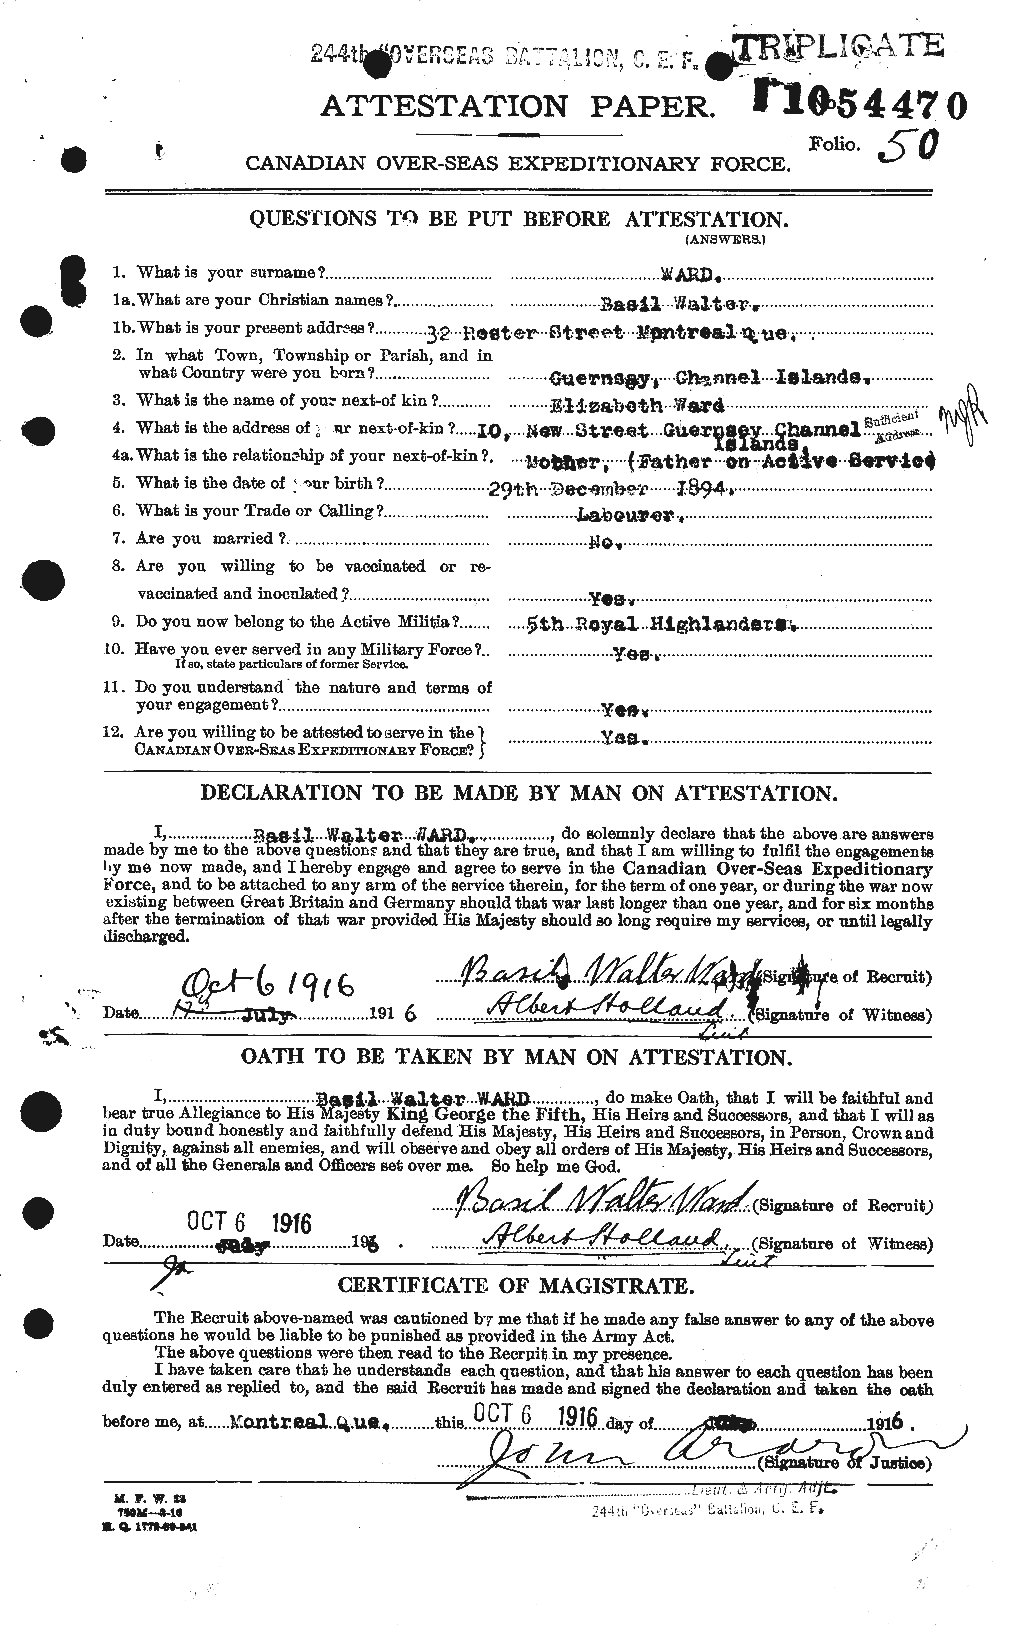 Personnel Records of the First World War - CEF 655160a